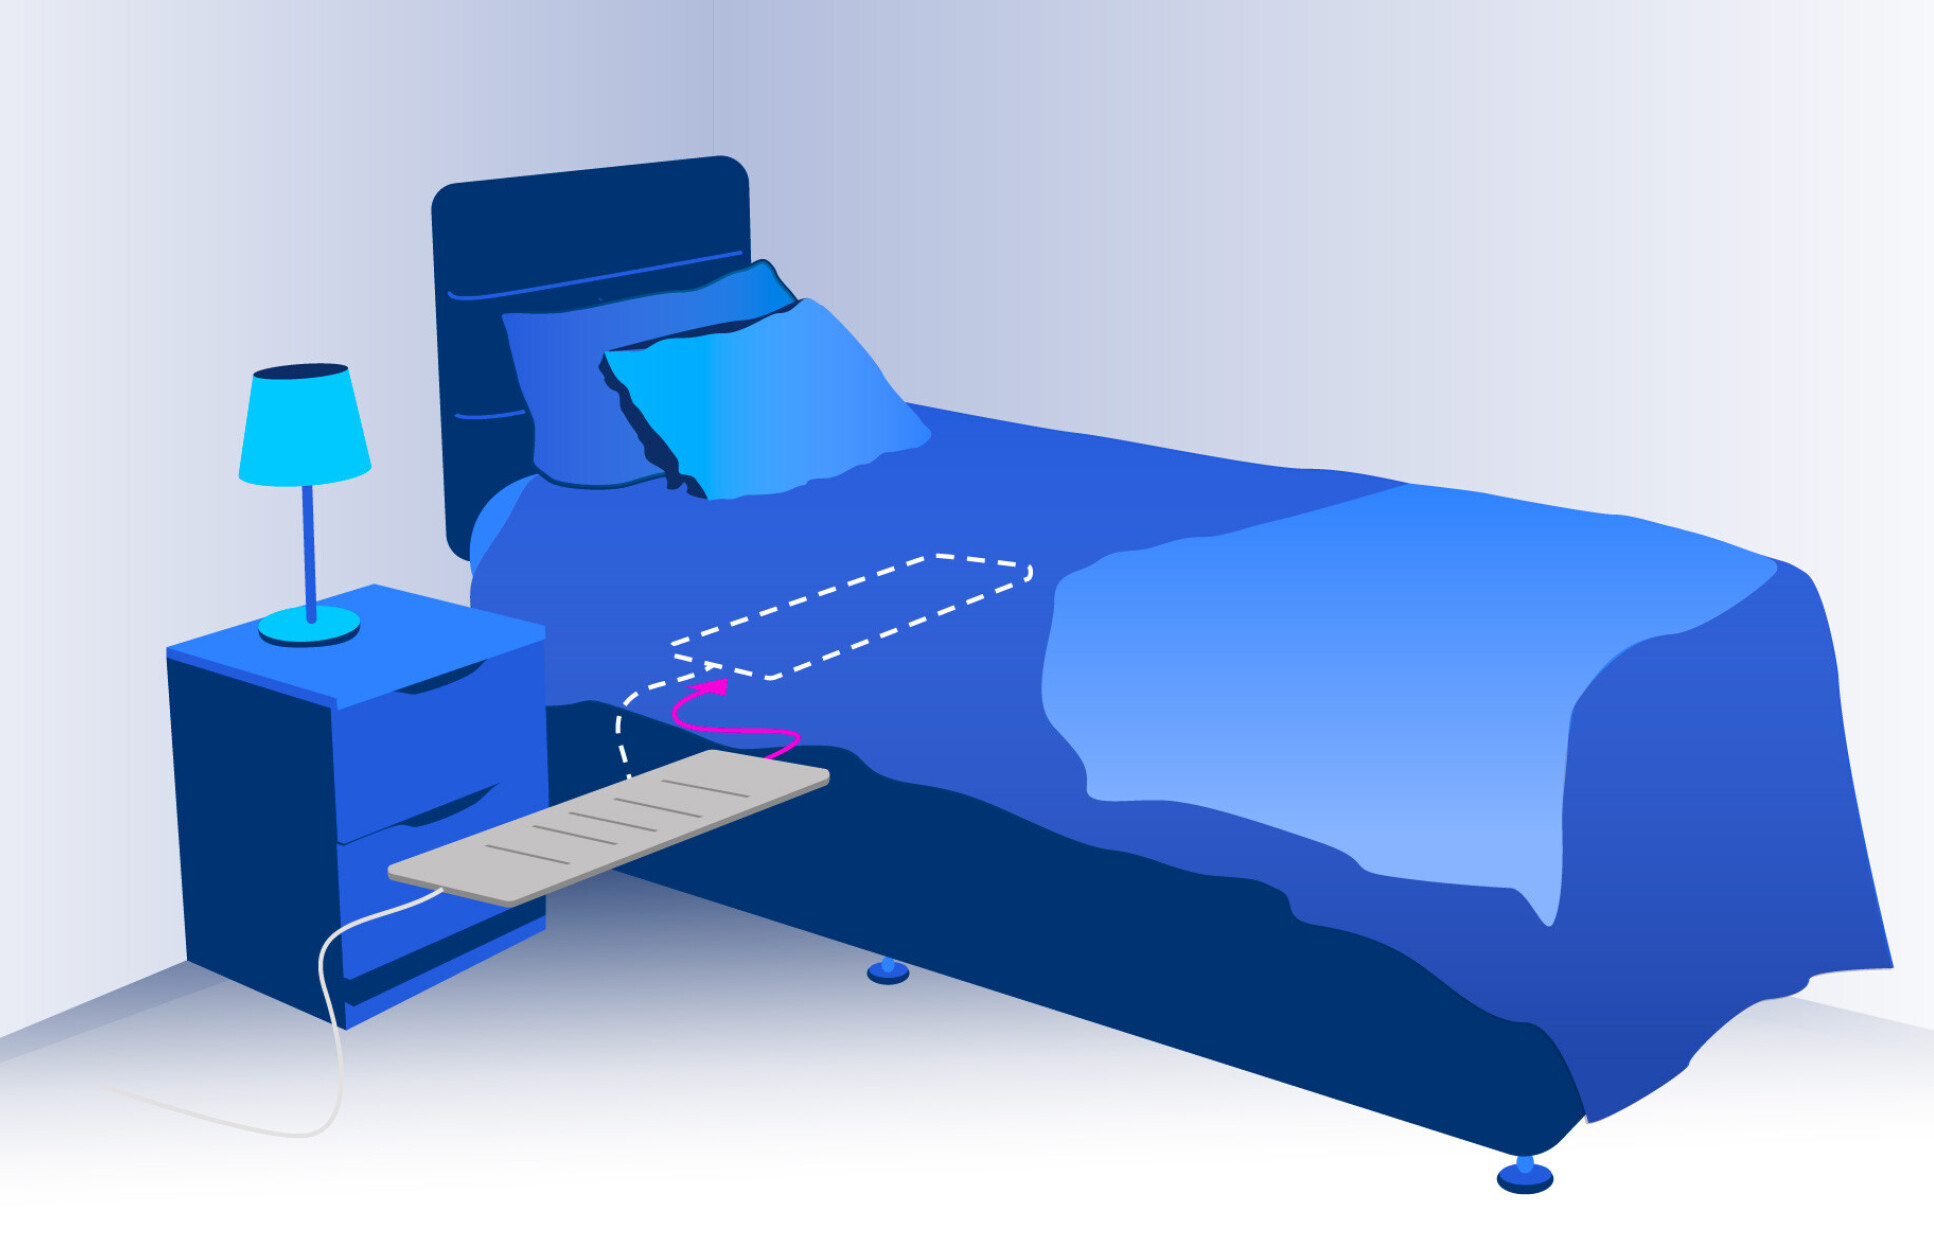 Illustration of a bed with a mat placed underneath it.